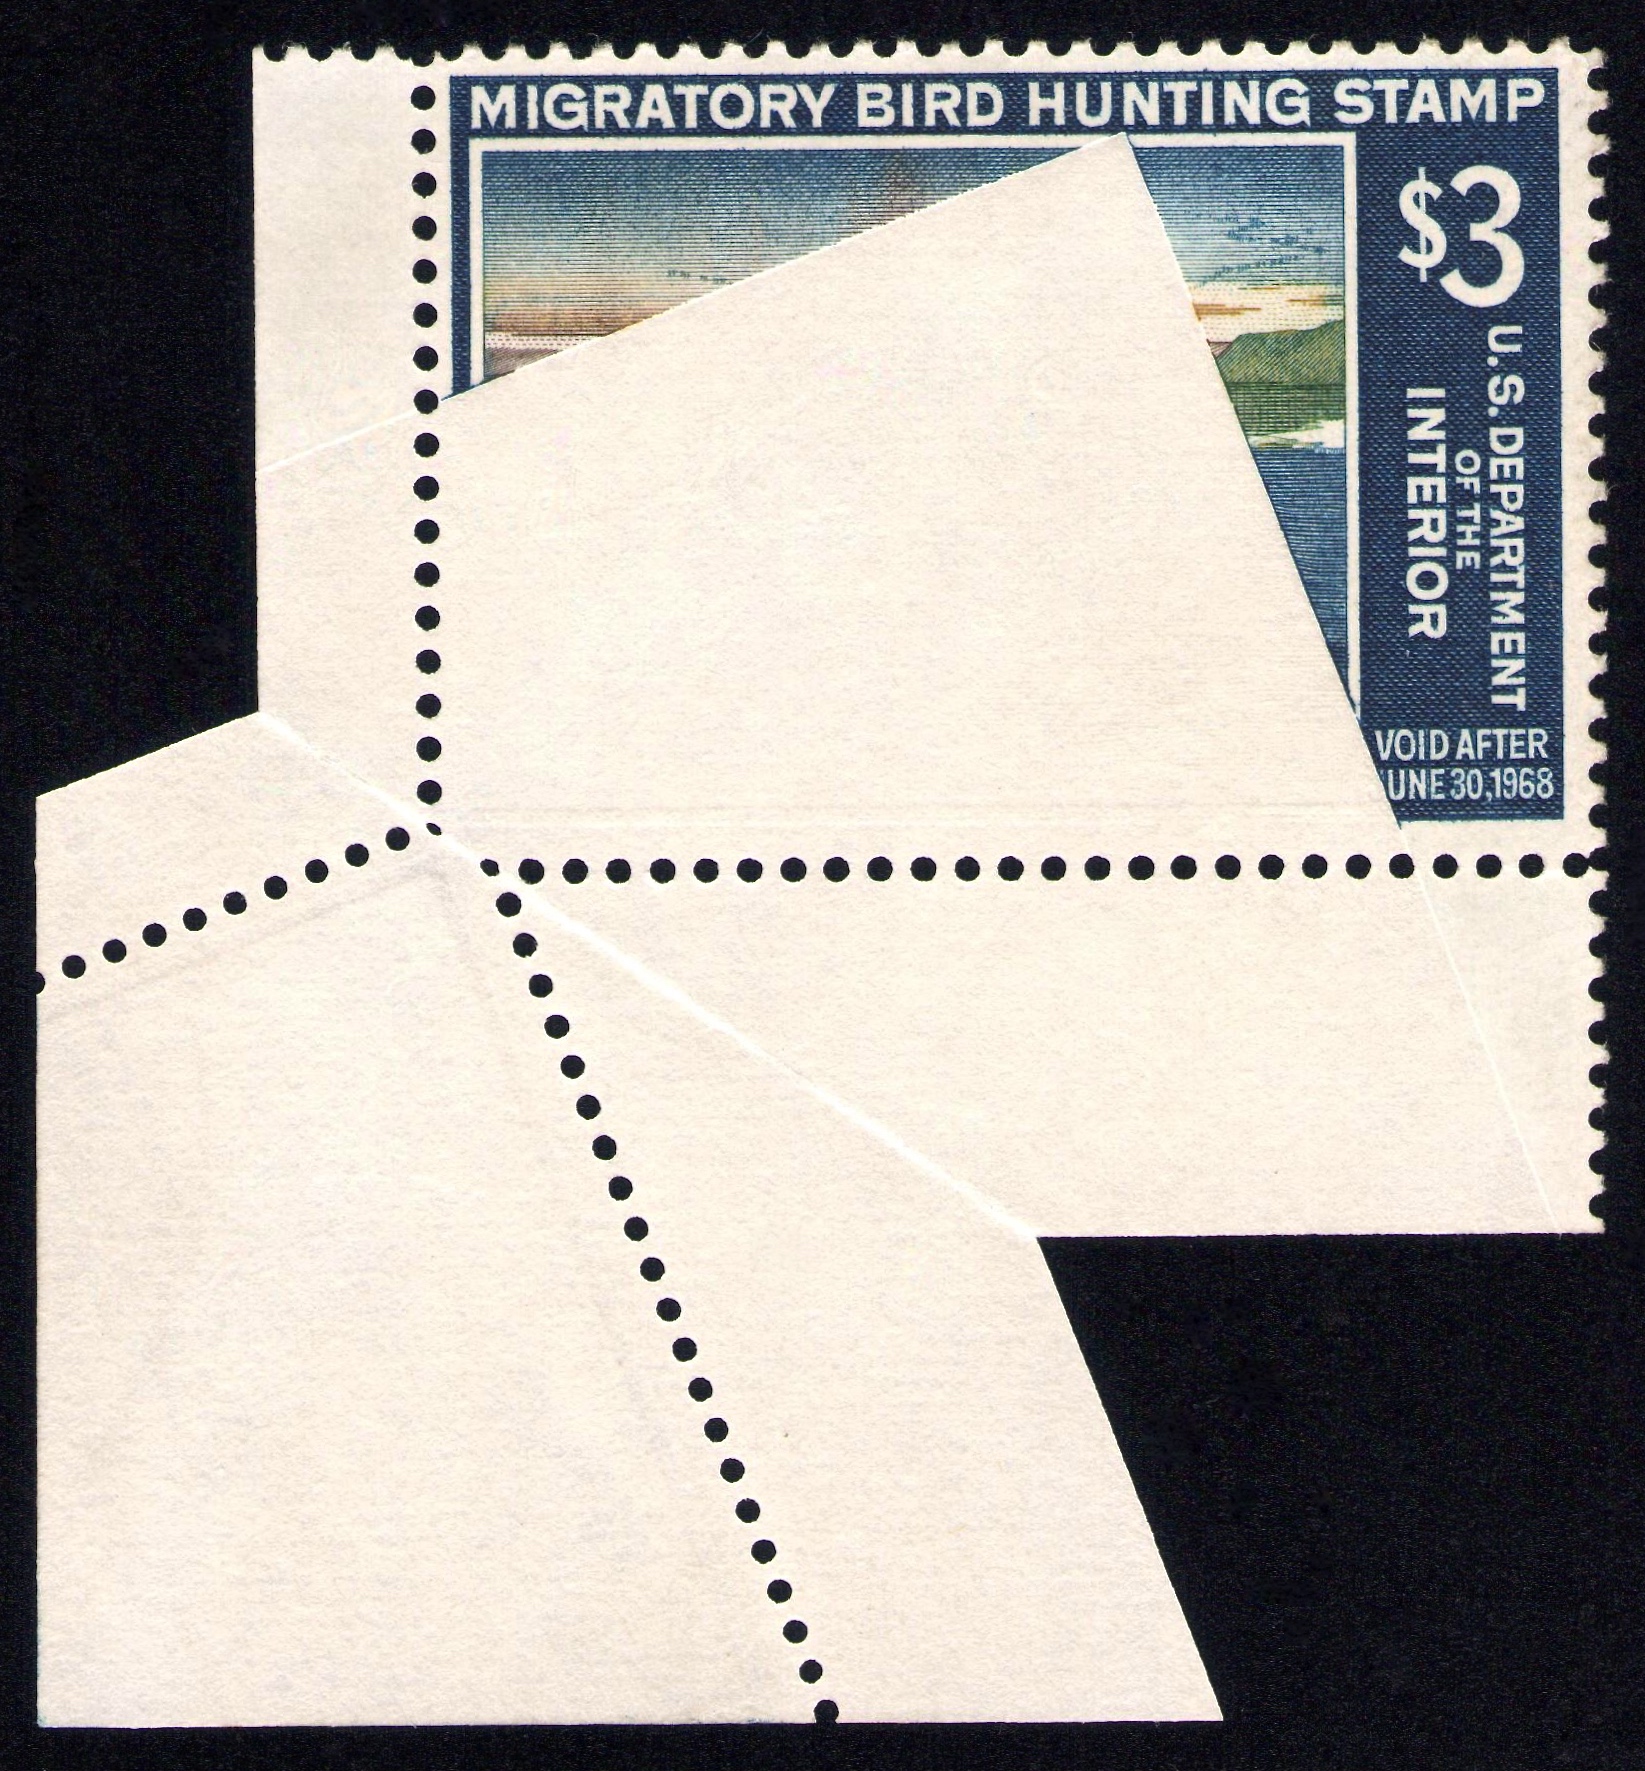 RW34 (1967-68) with Major Paper Fold